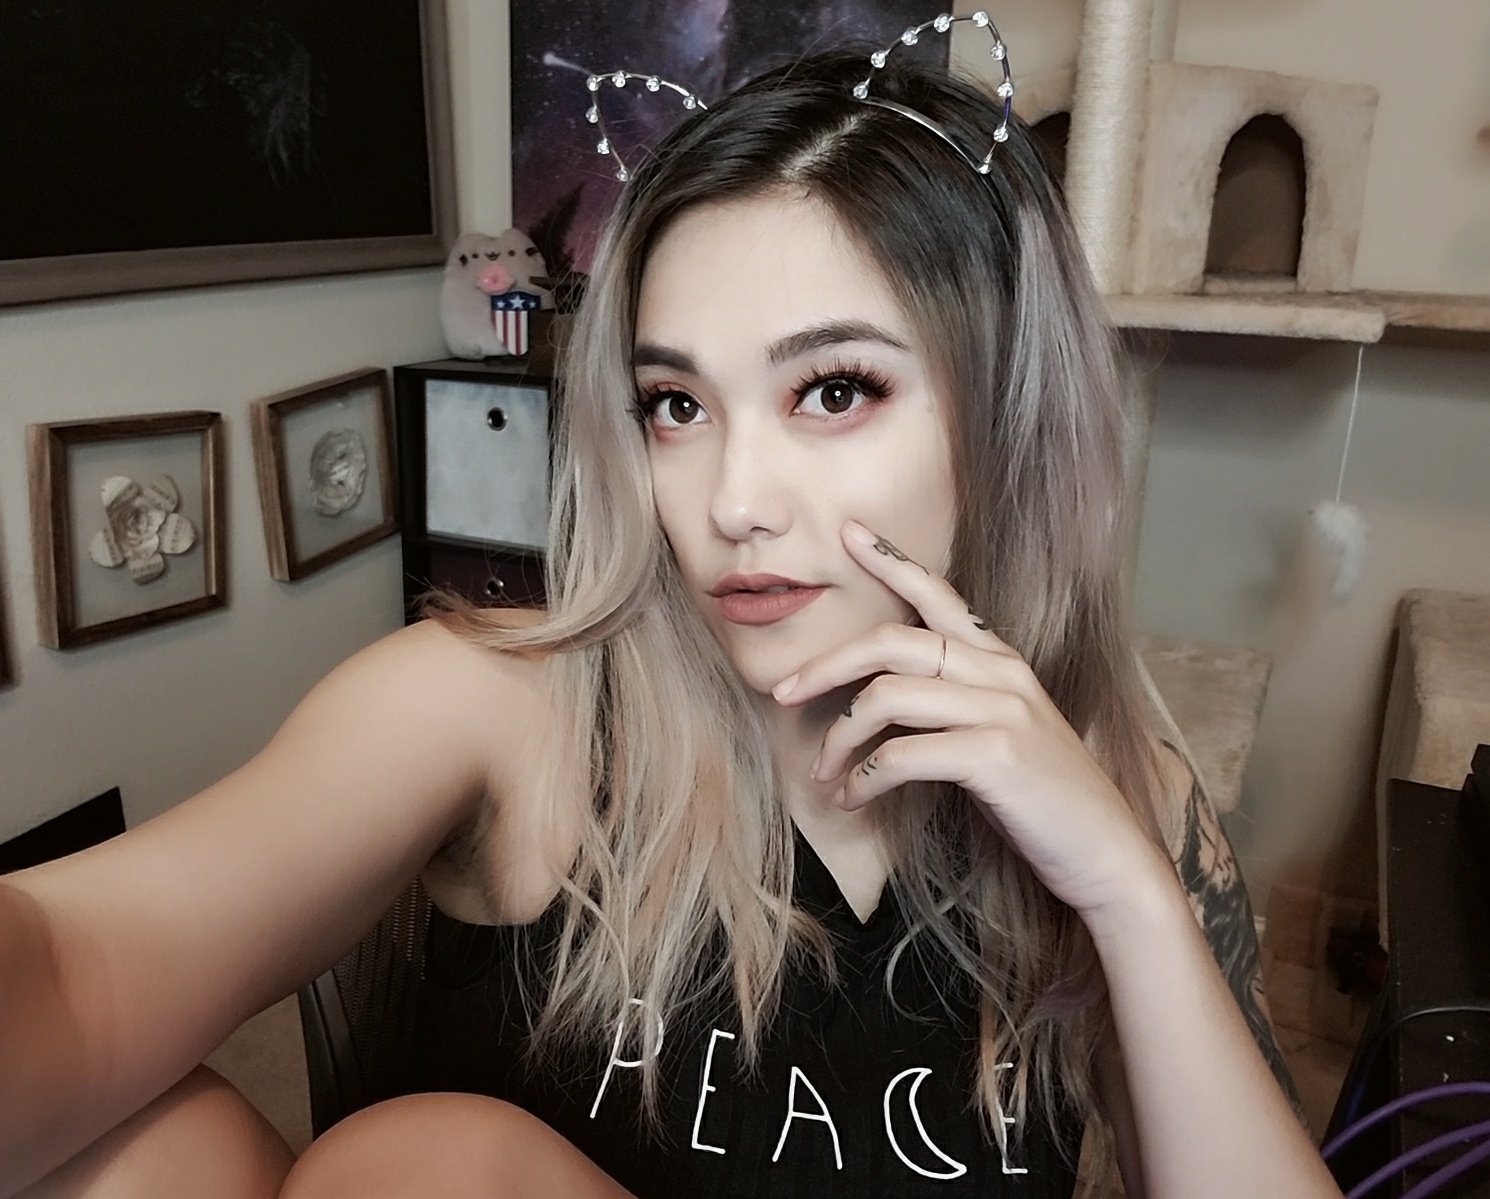 AvaGG 💀 on X: What about this picture upsets you? 😈😈 Day 5000 of  fortnite. t.coUzpVZPh0YE t.coOxwT4LElWW  X